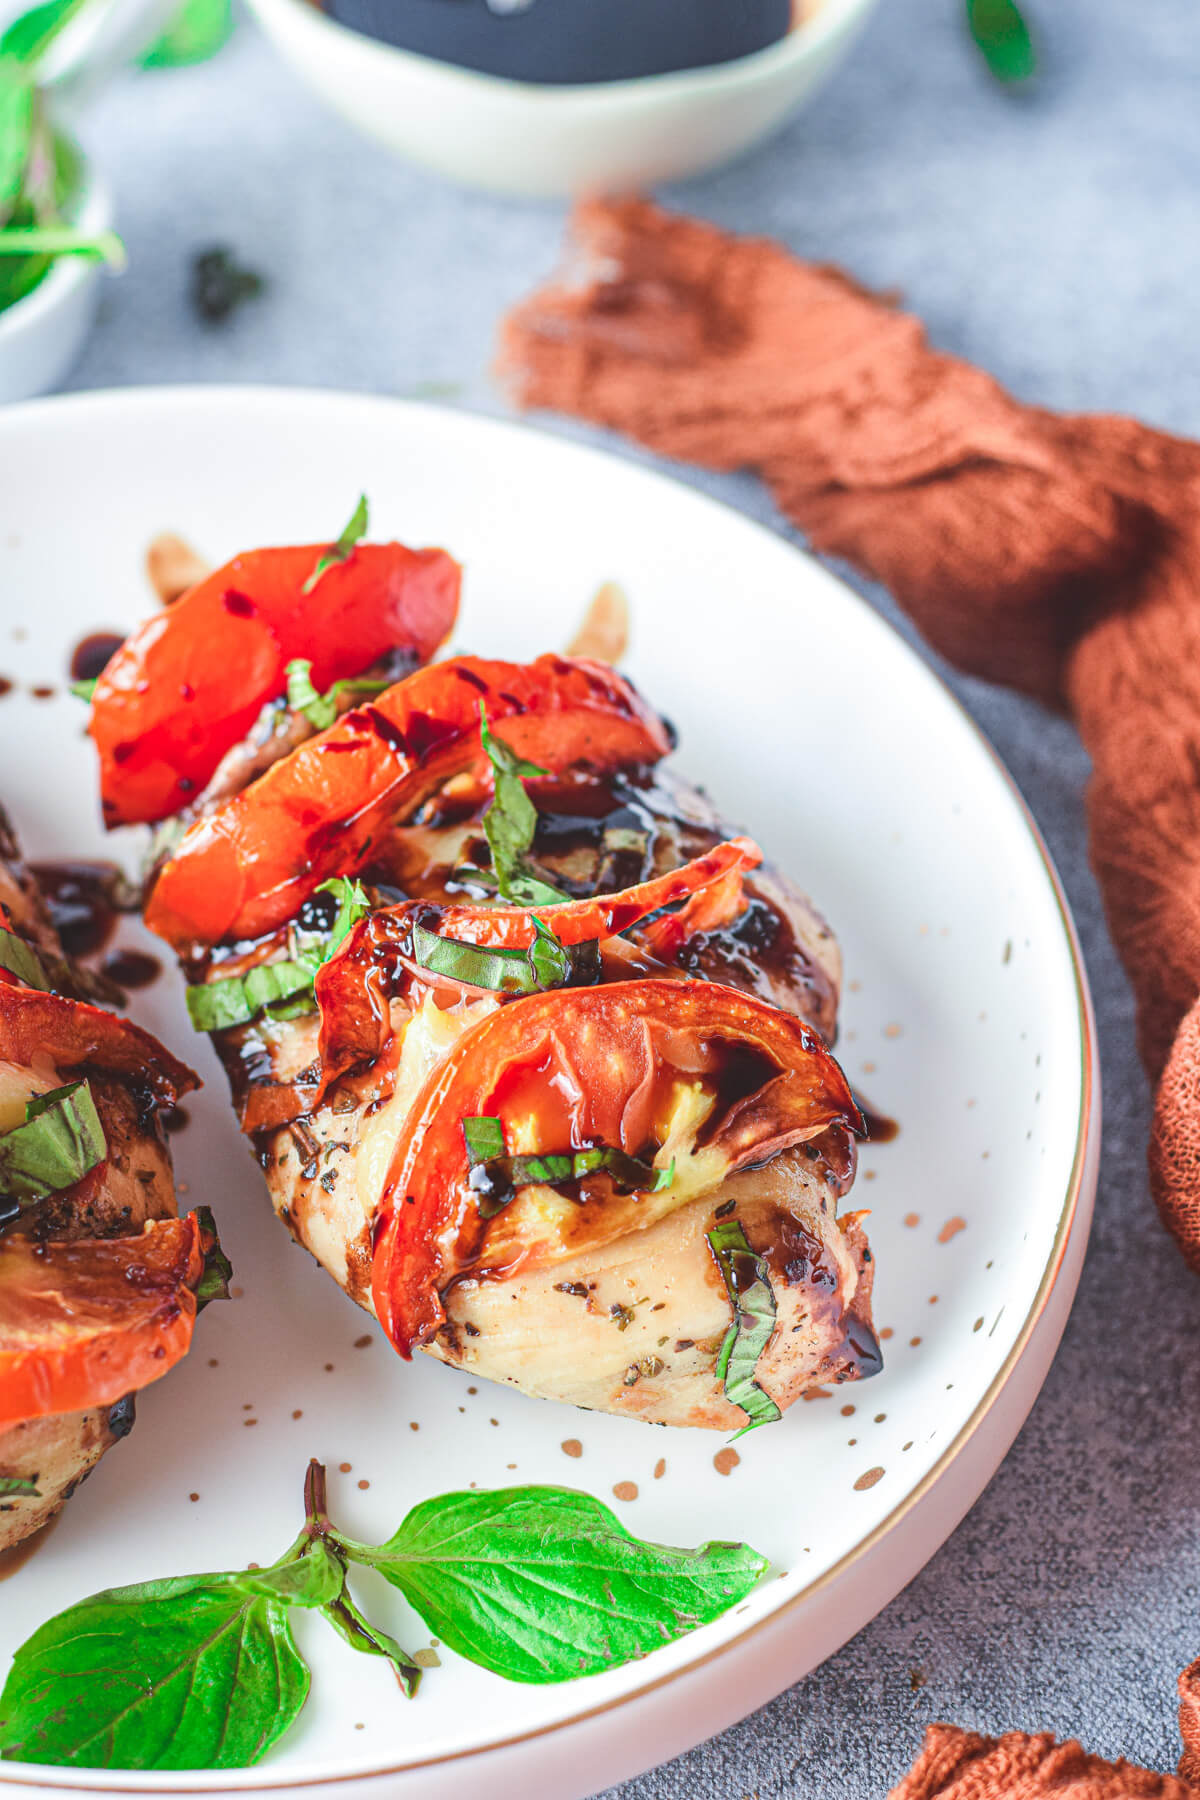 One chicken caprese stuffed with mozzarella and tomatoes then garnished with fresh basil and balsamic drizzle.